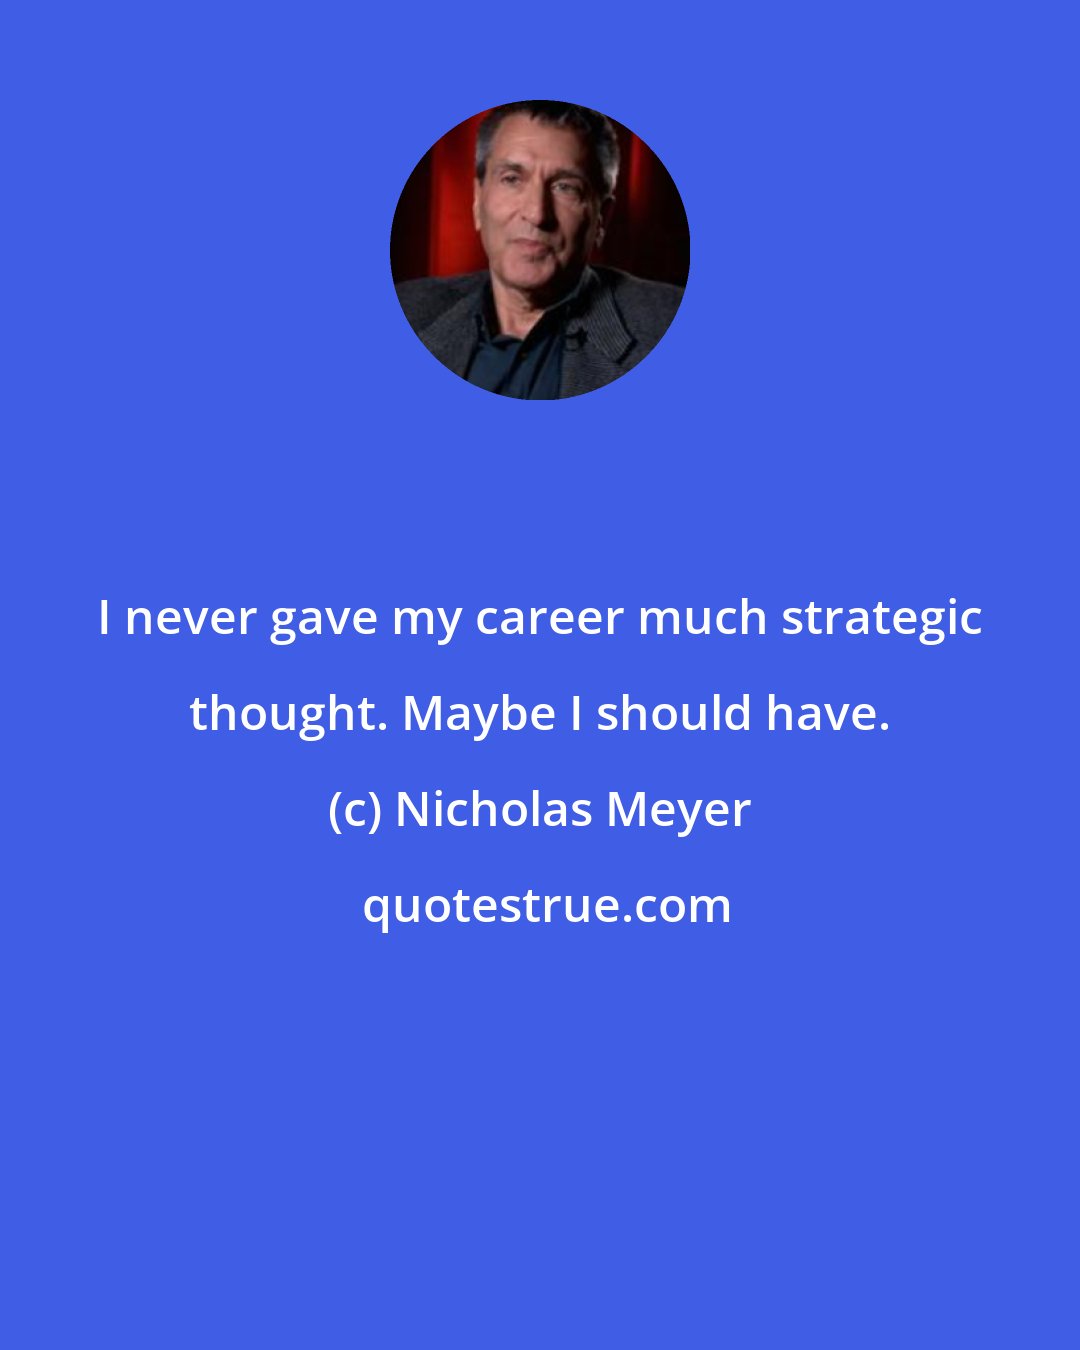 Nicholas Meyer: I never gave my career much strategic thought. Maybe I should have.